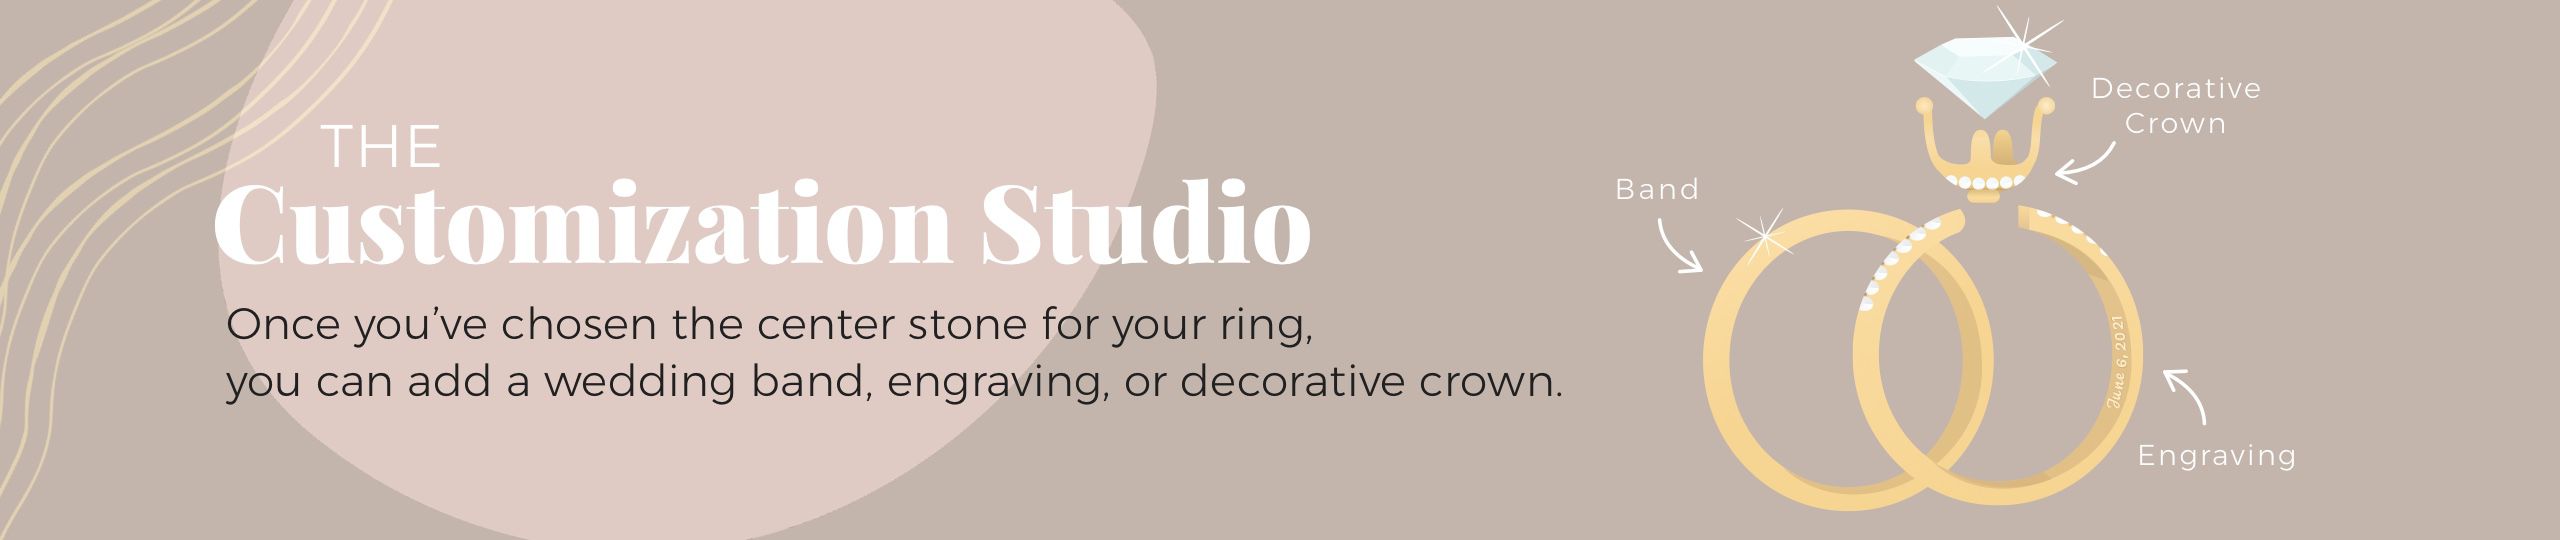 Add a wedding band and more with Customization Studio